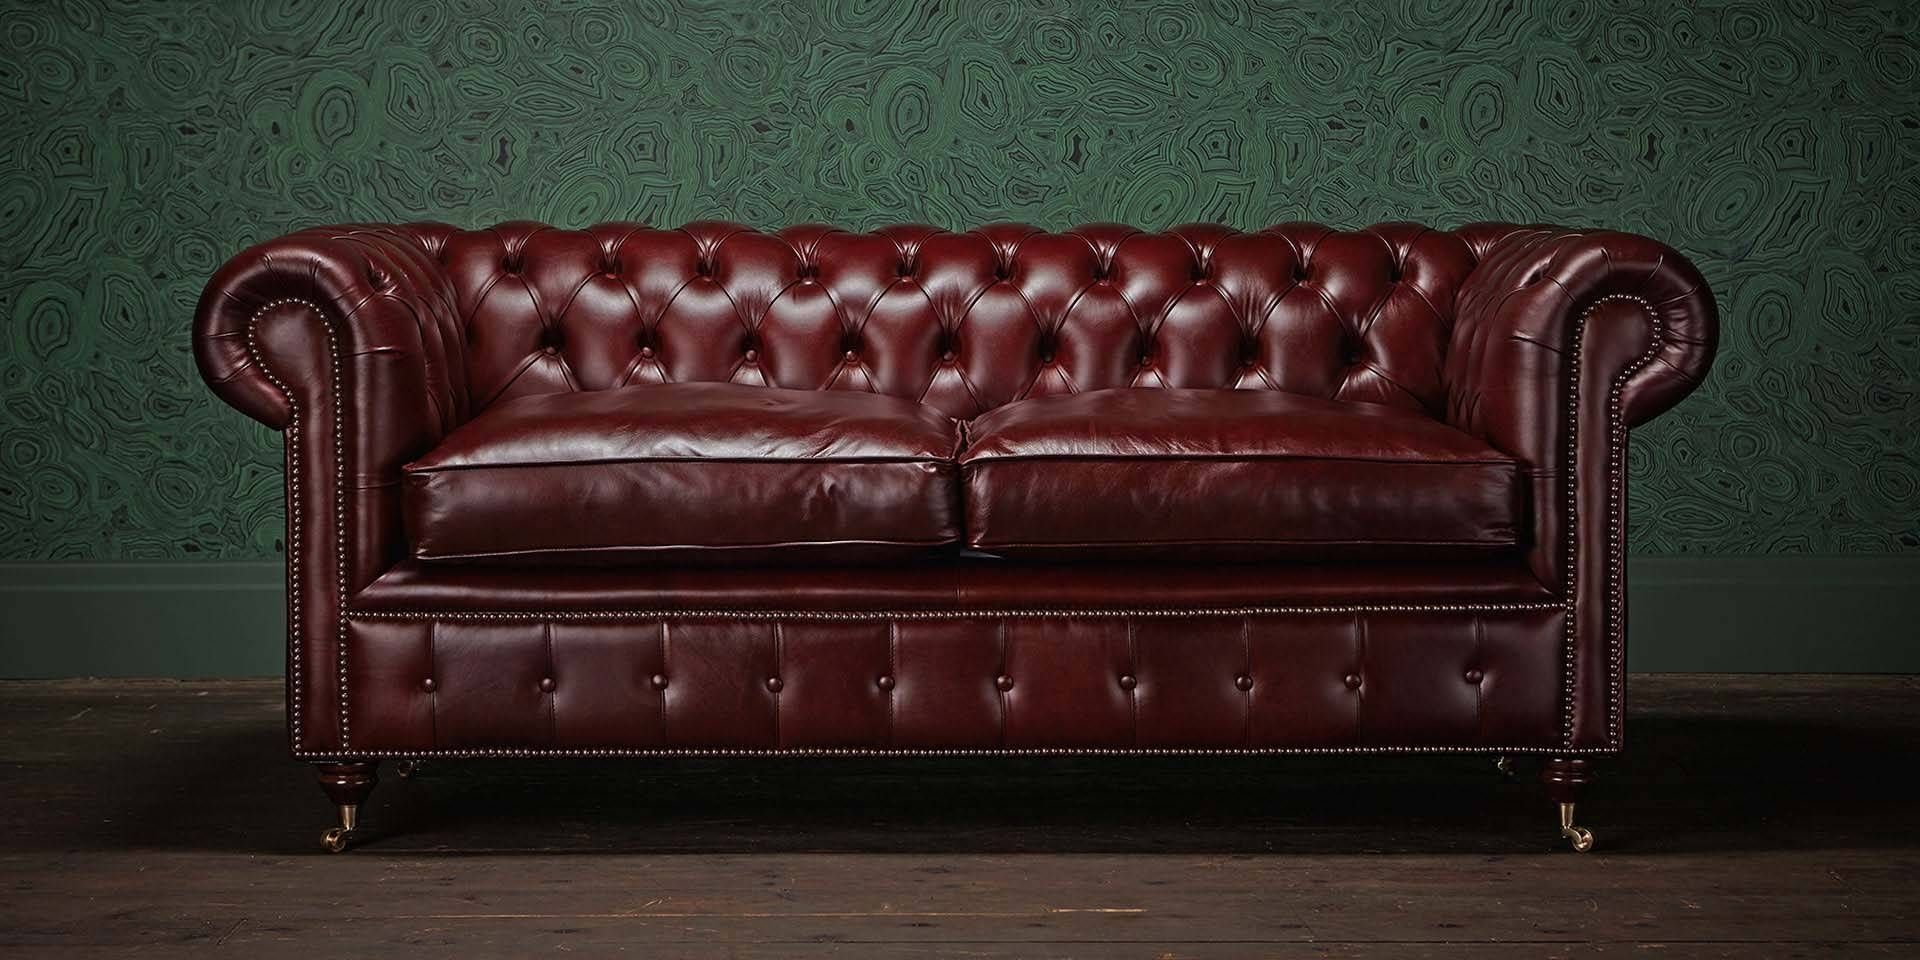 Chesterfields Of England | The Original Chesterfield Company Pertaining To Chesterfield Sofa And Chairs (View 9 of 30)